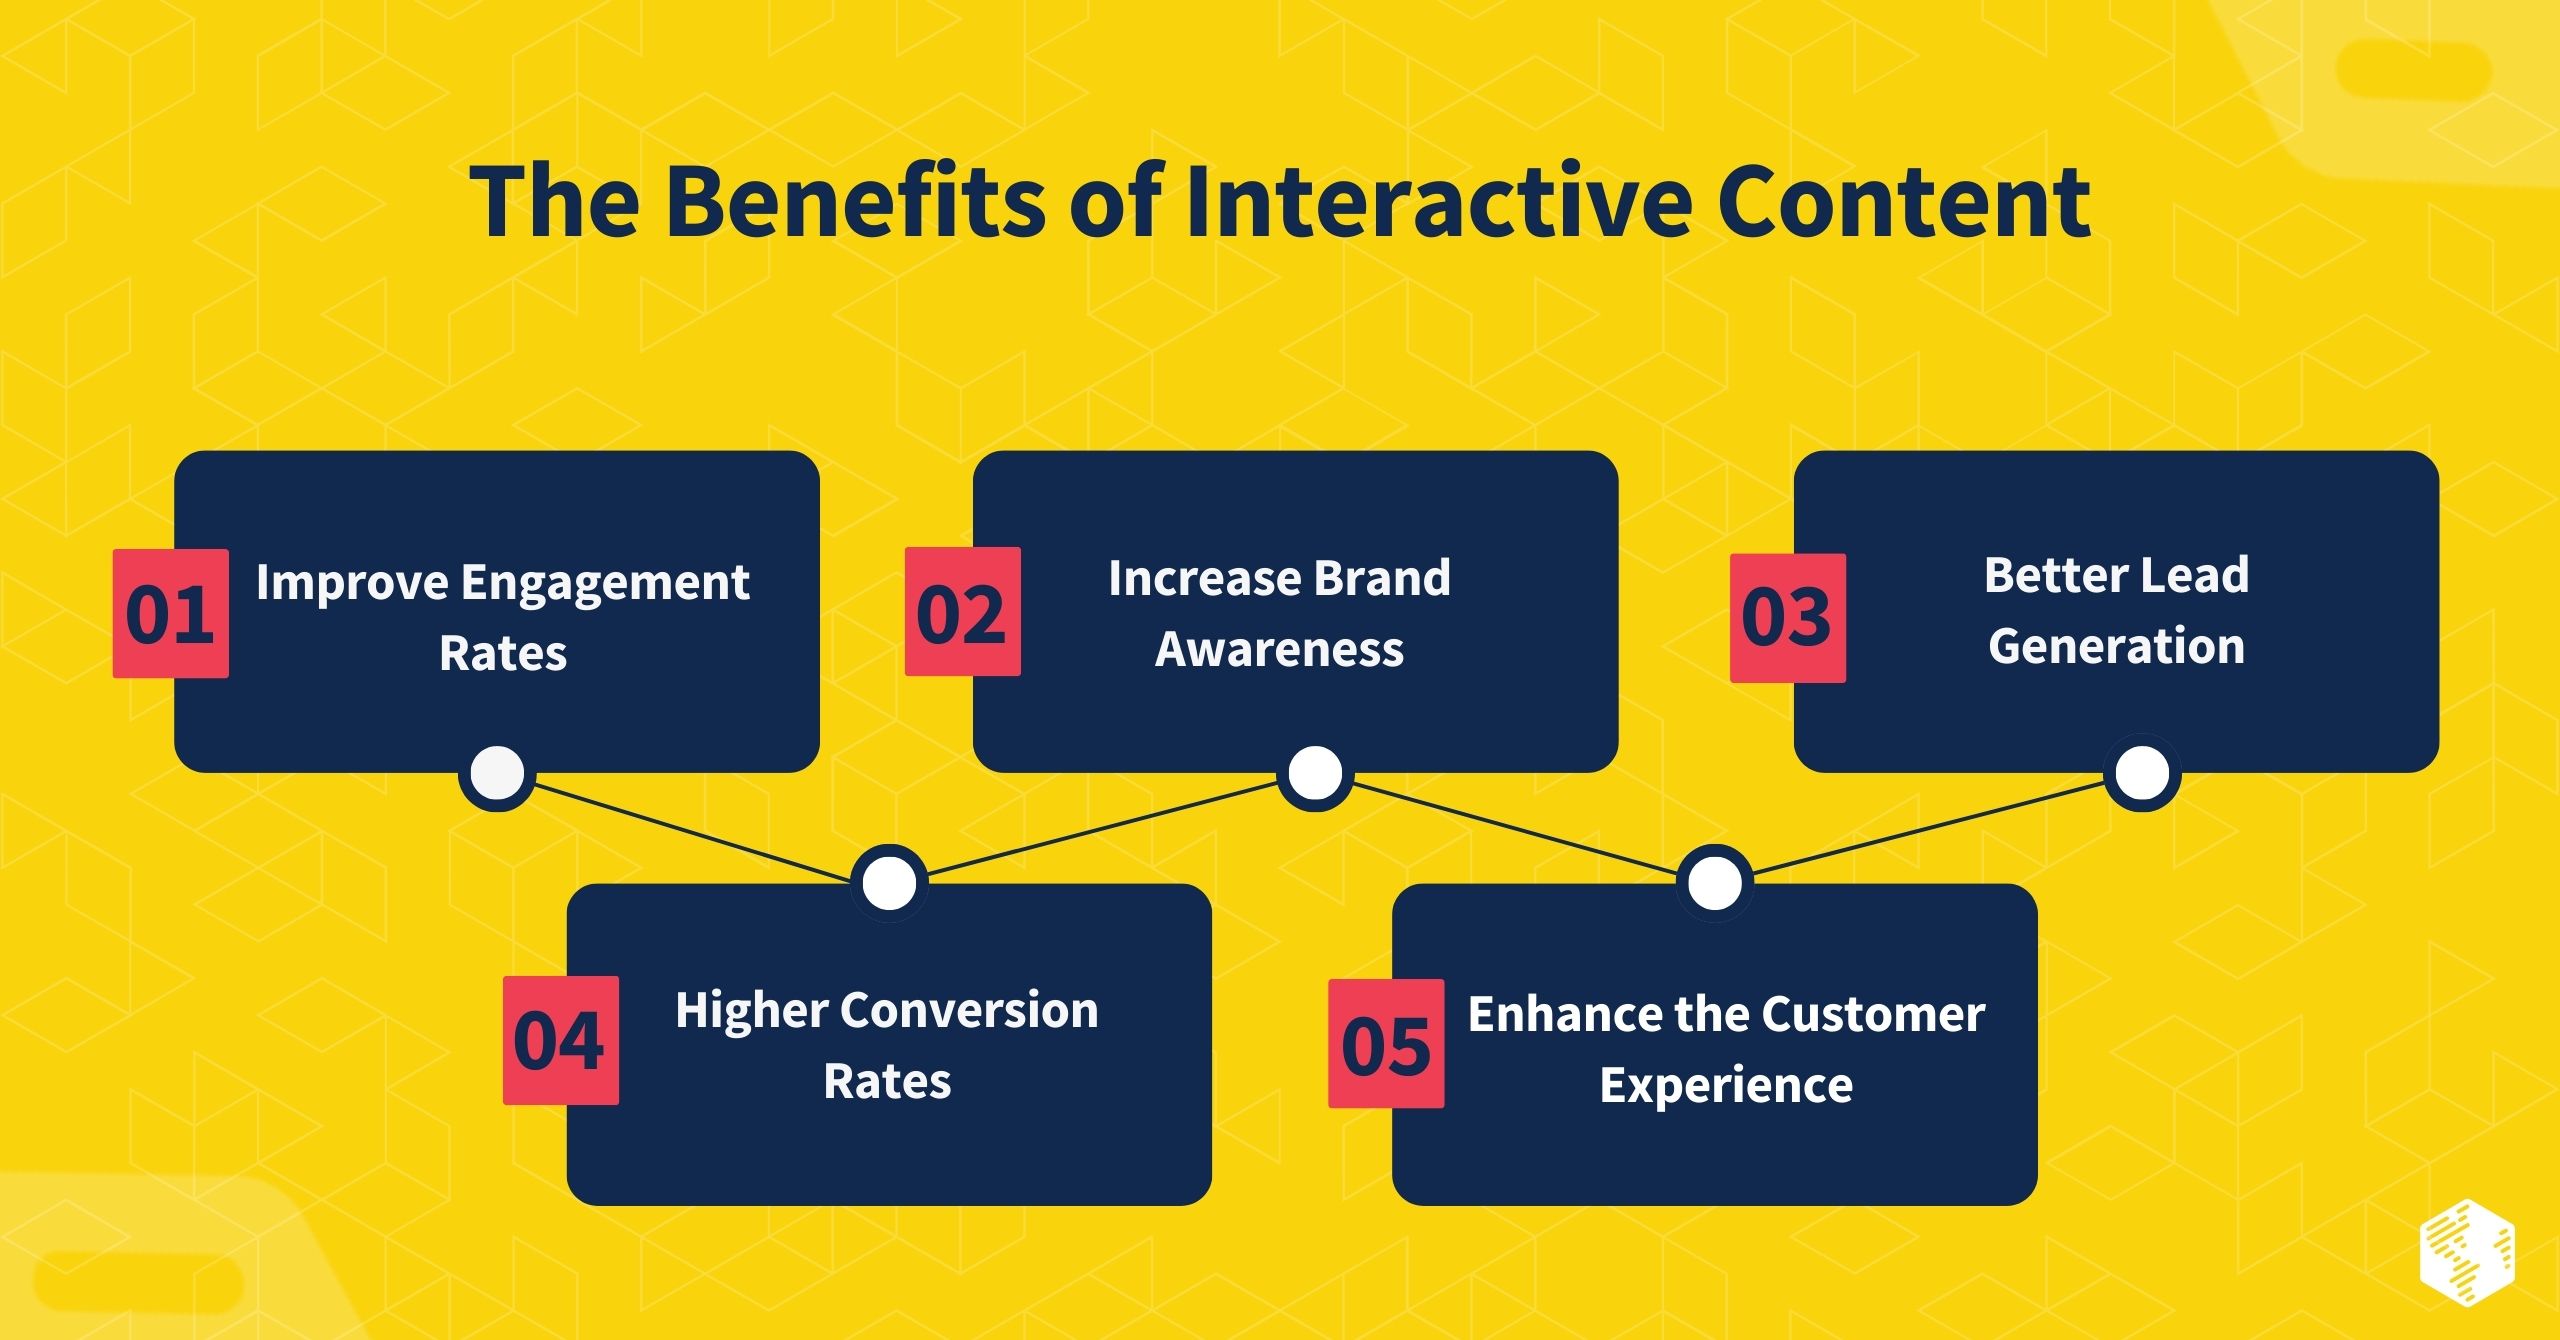 The Benefits of Interactive Content